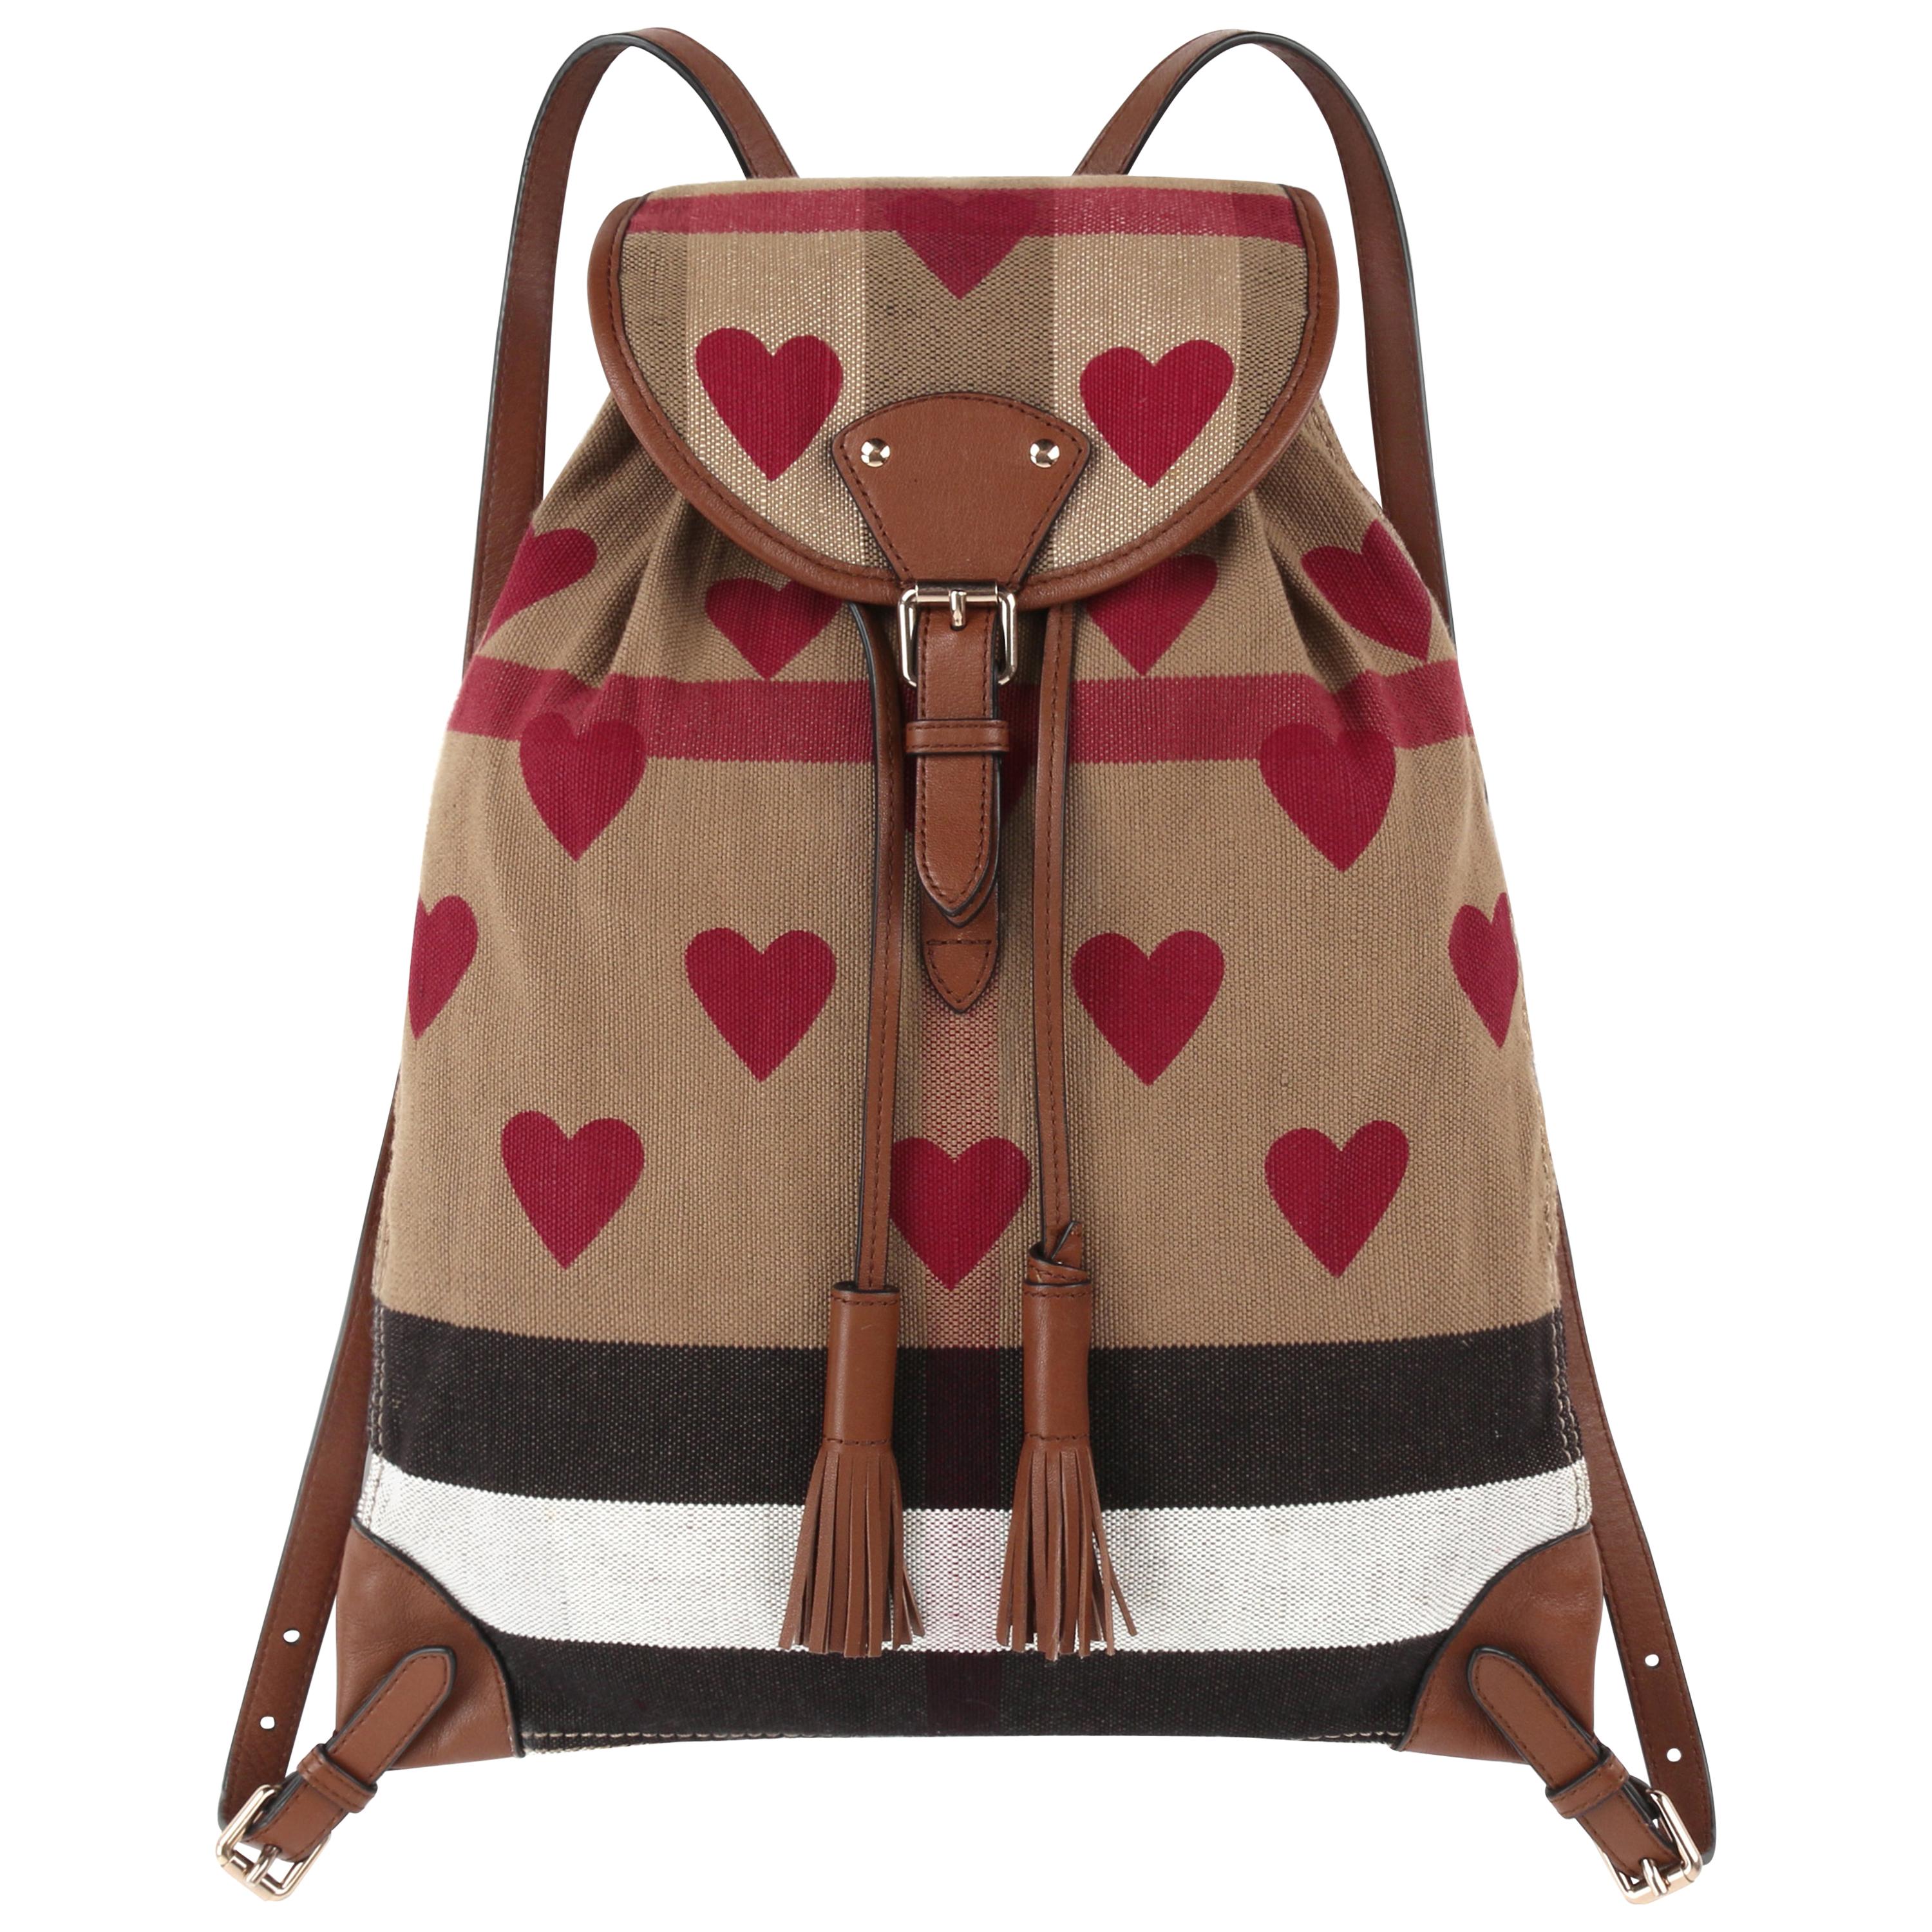 BURBERRY Chilton Check Hearts Canvas Leather Trim Backpack